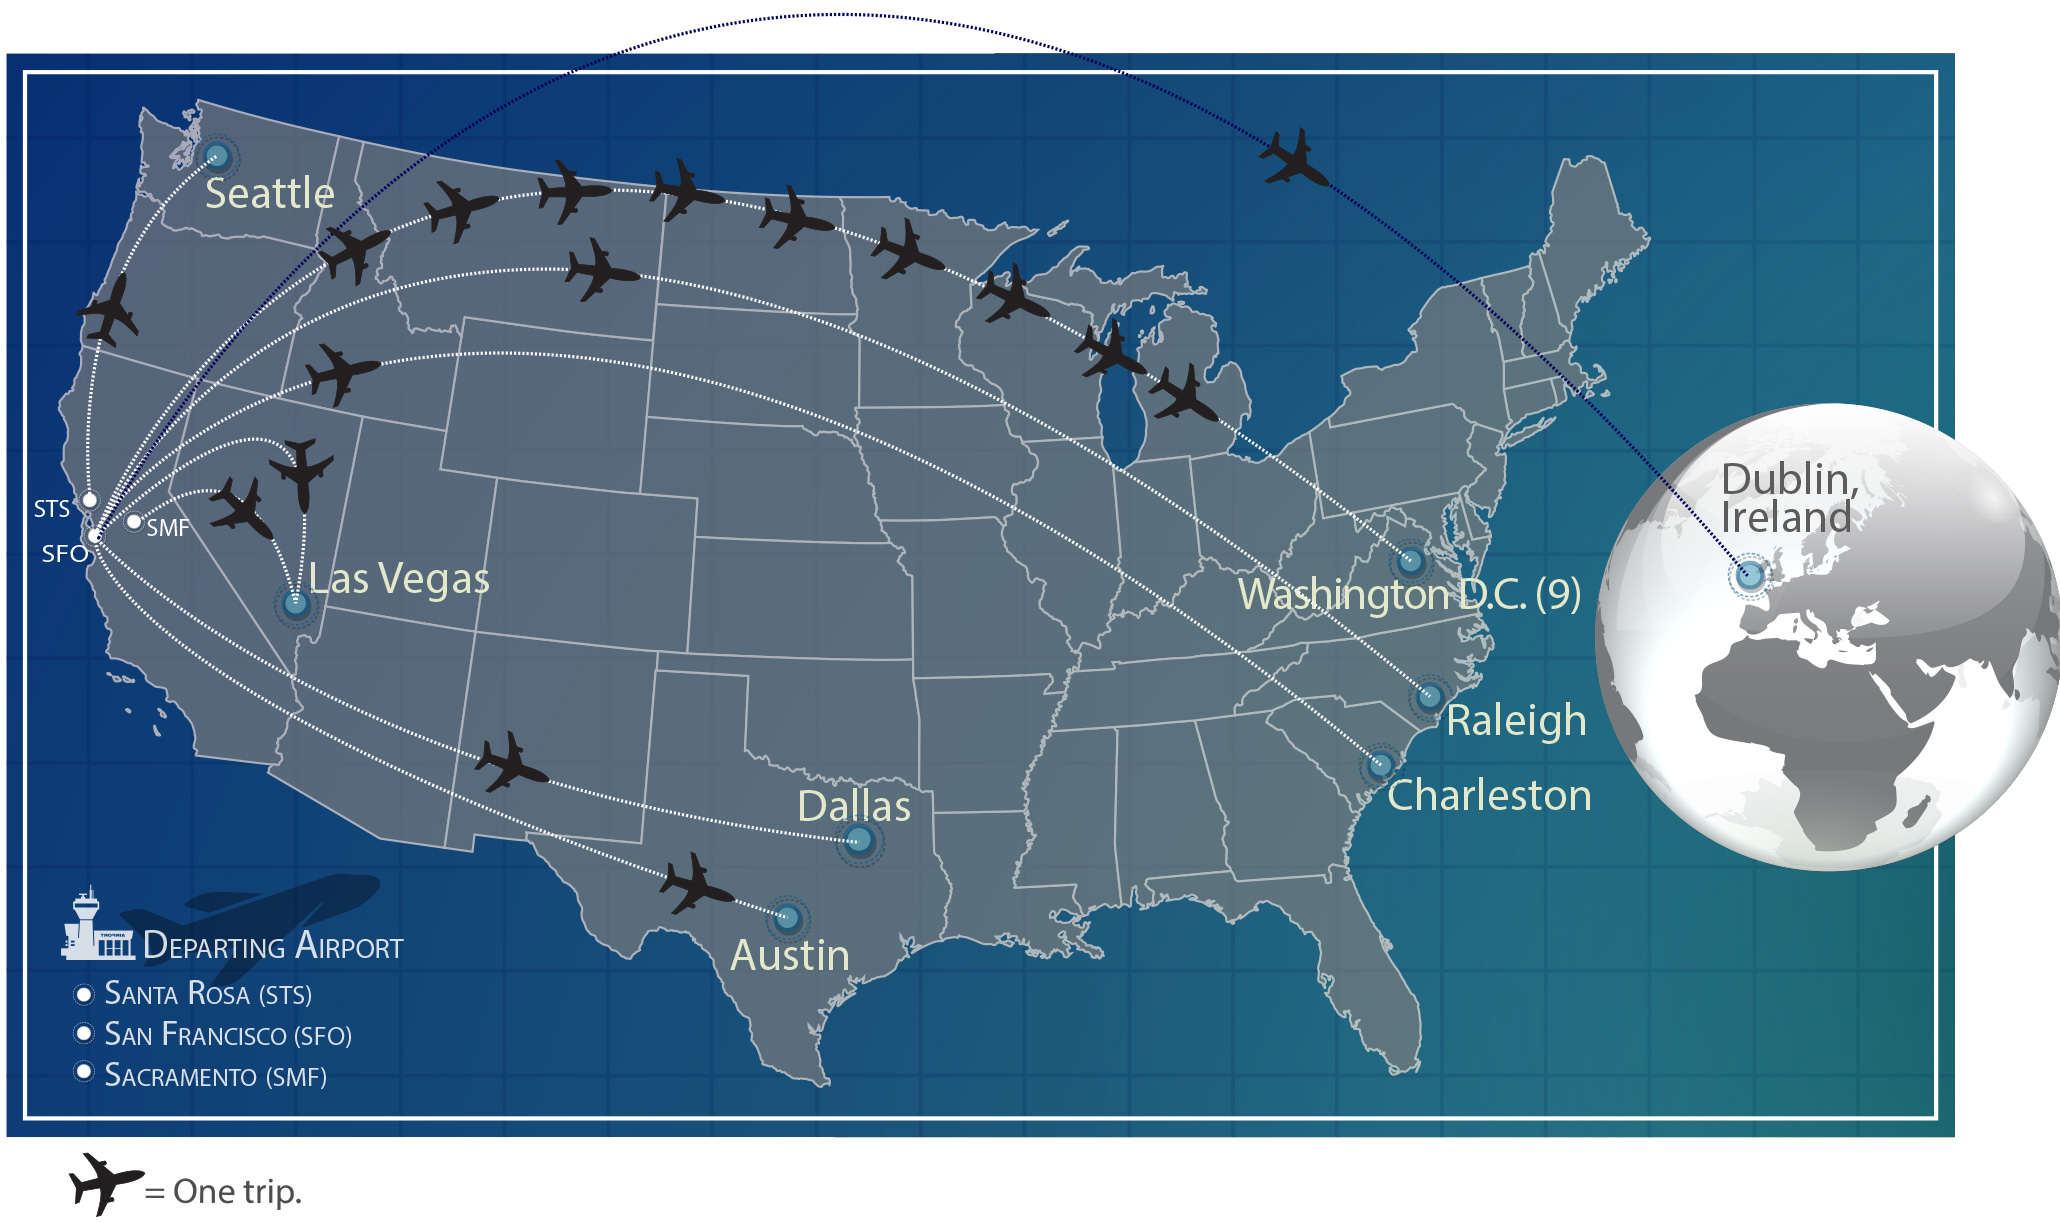 Figure 5 is a map displaying the out-of-state travel by the chief executive officer.